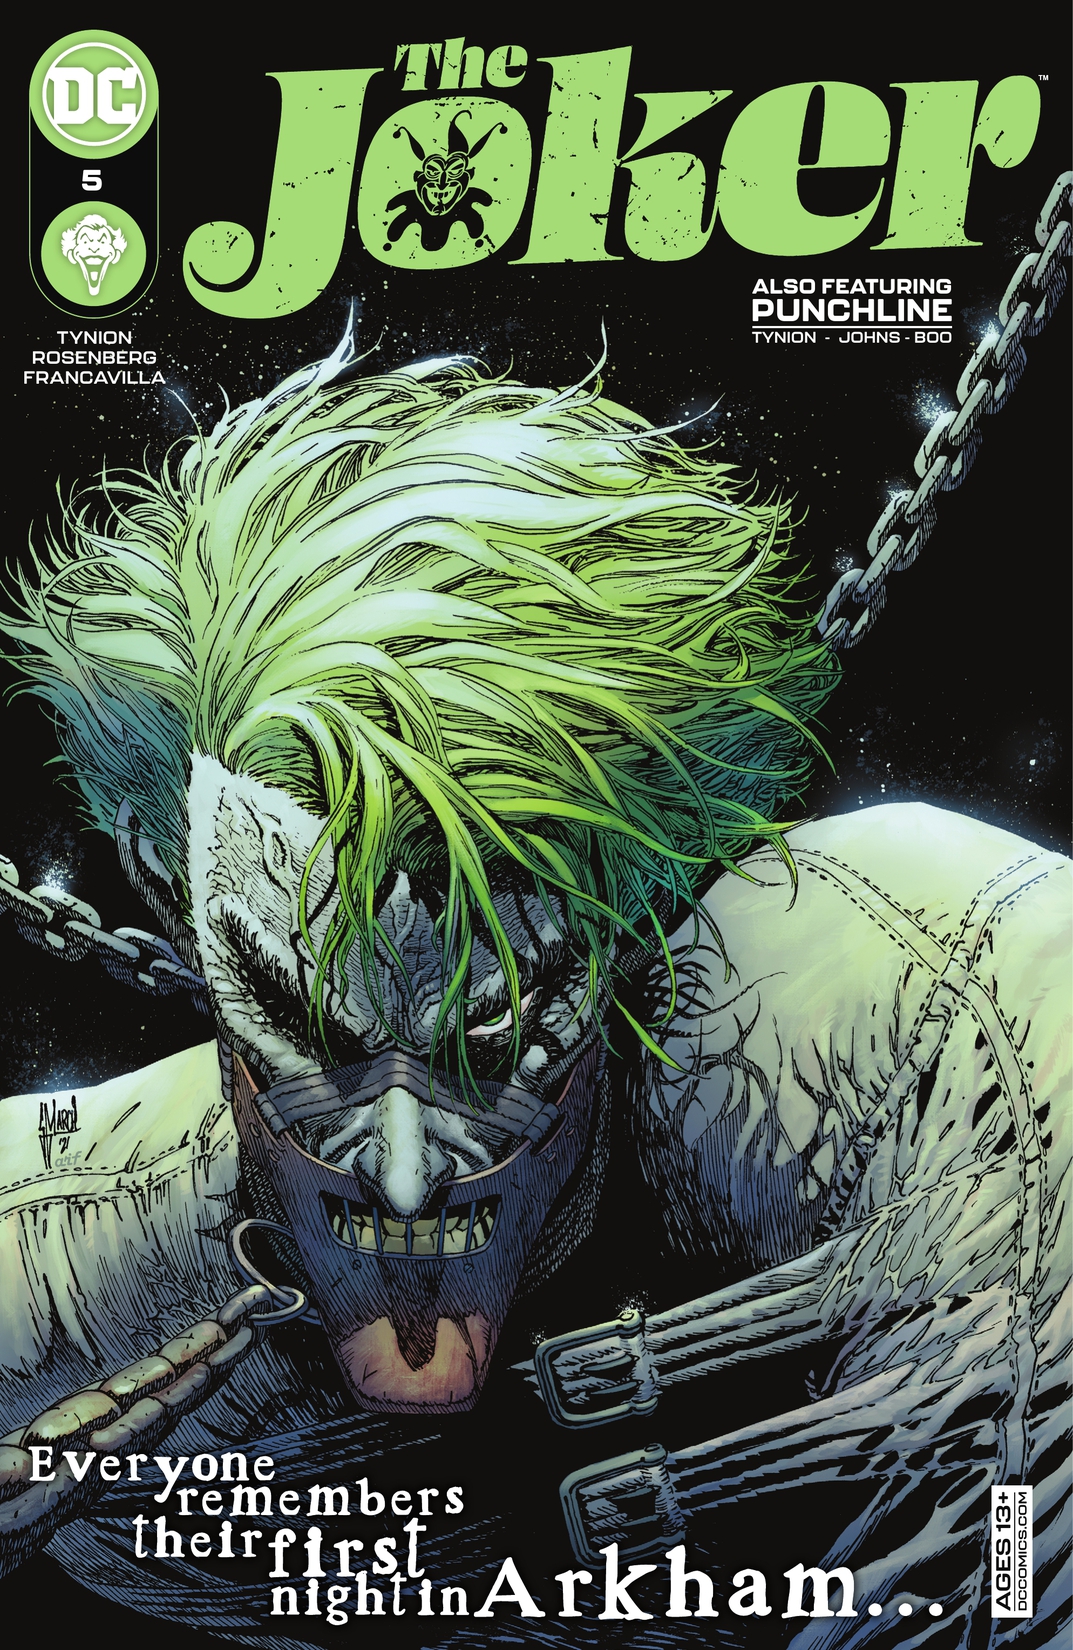 The Joker (2021-) #5 preview images